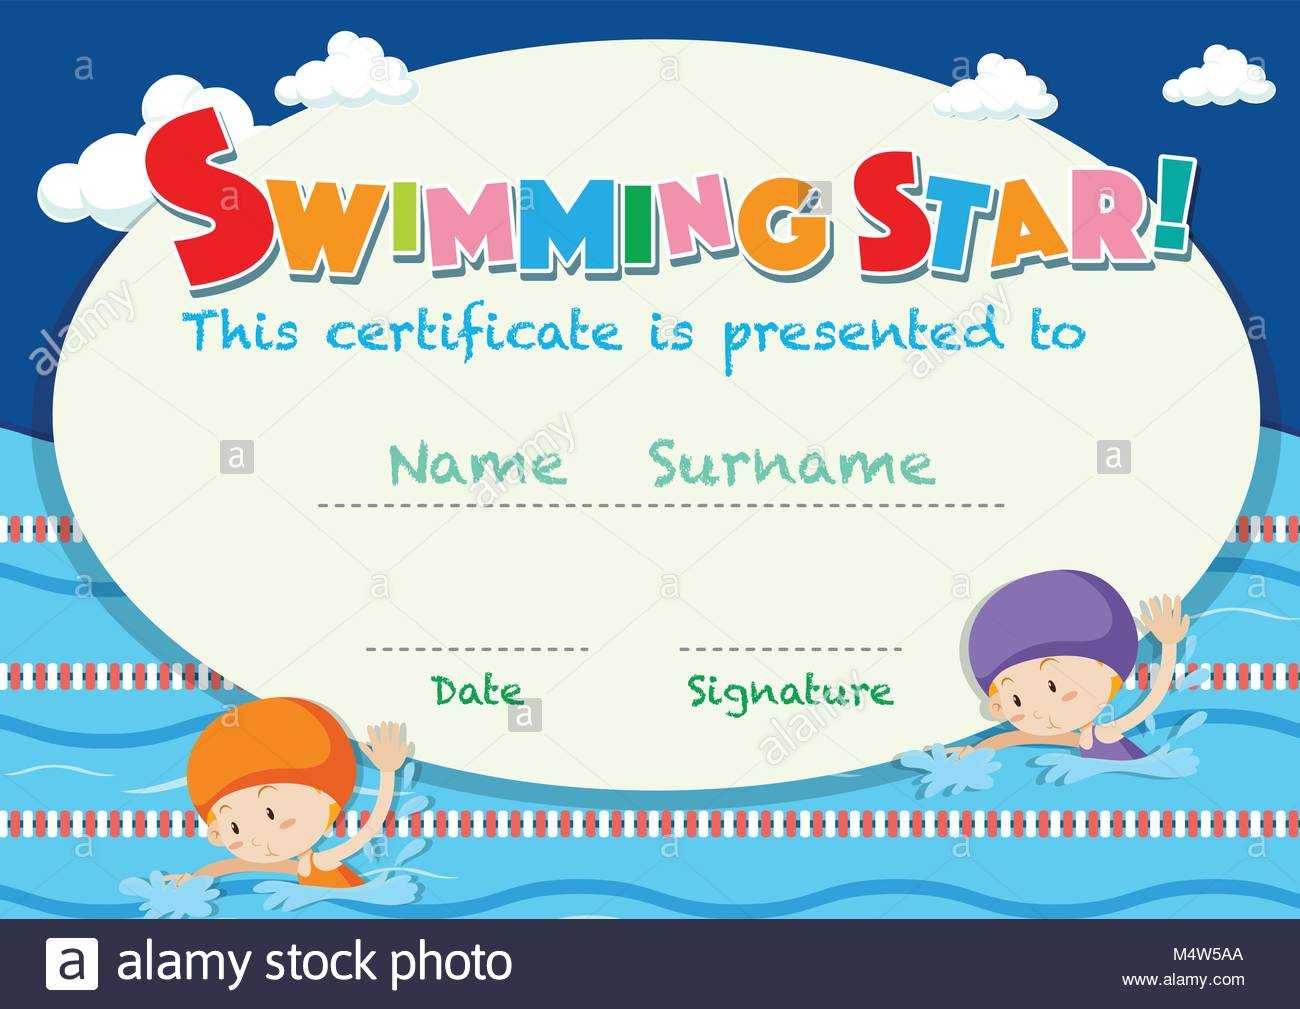 Certificate Template With Kids Swimming Illustration Stock Pertaining To Swimming Award Certificate Template